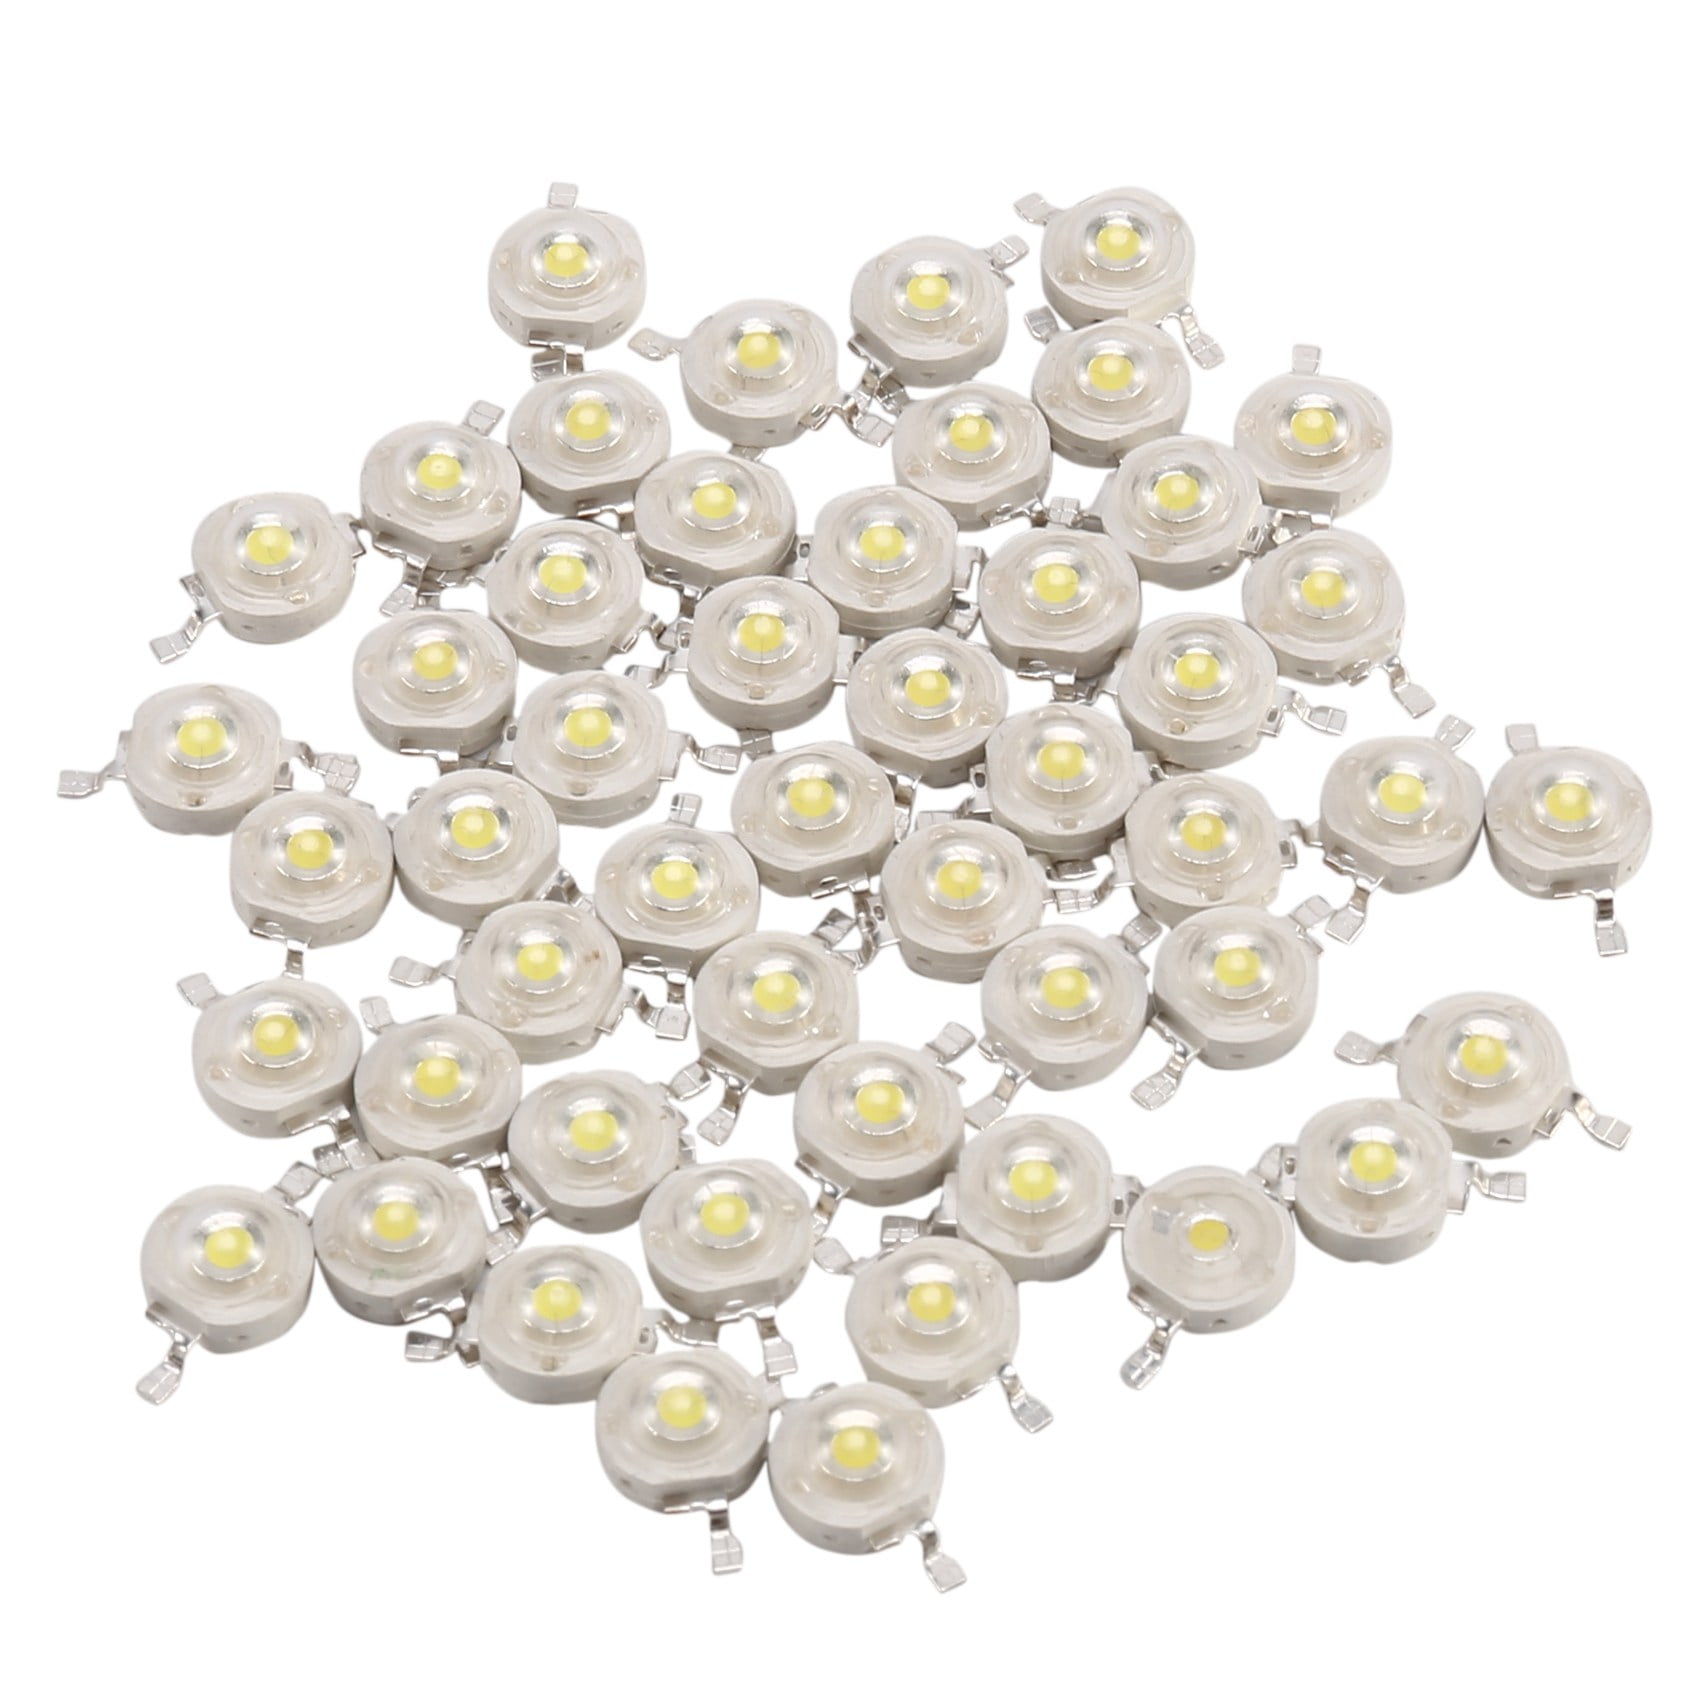 50pcs High Power 1W White SMD LED Diode Beads Ultra Bright LED Chip Lamp 6000K 